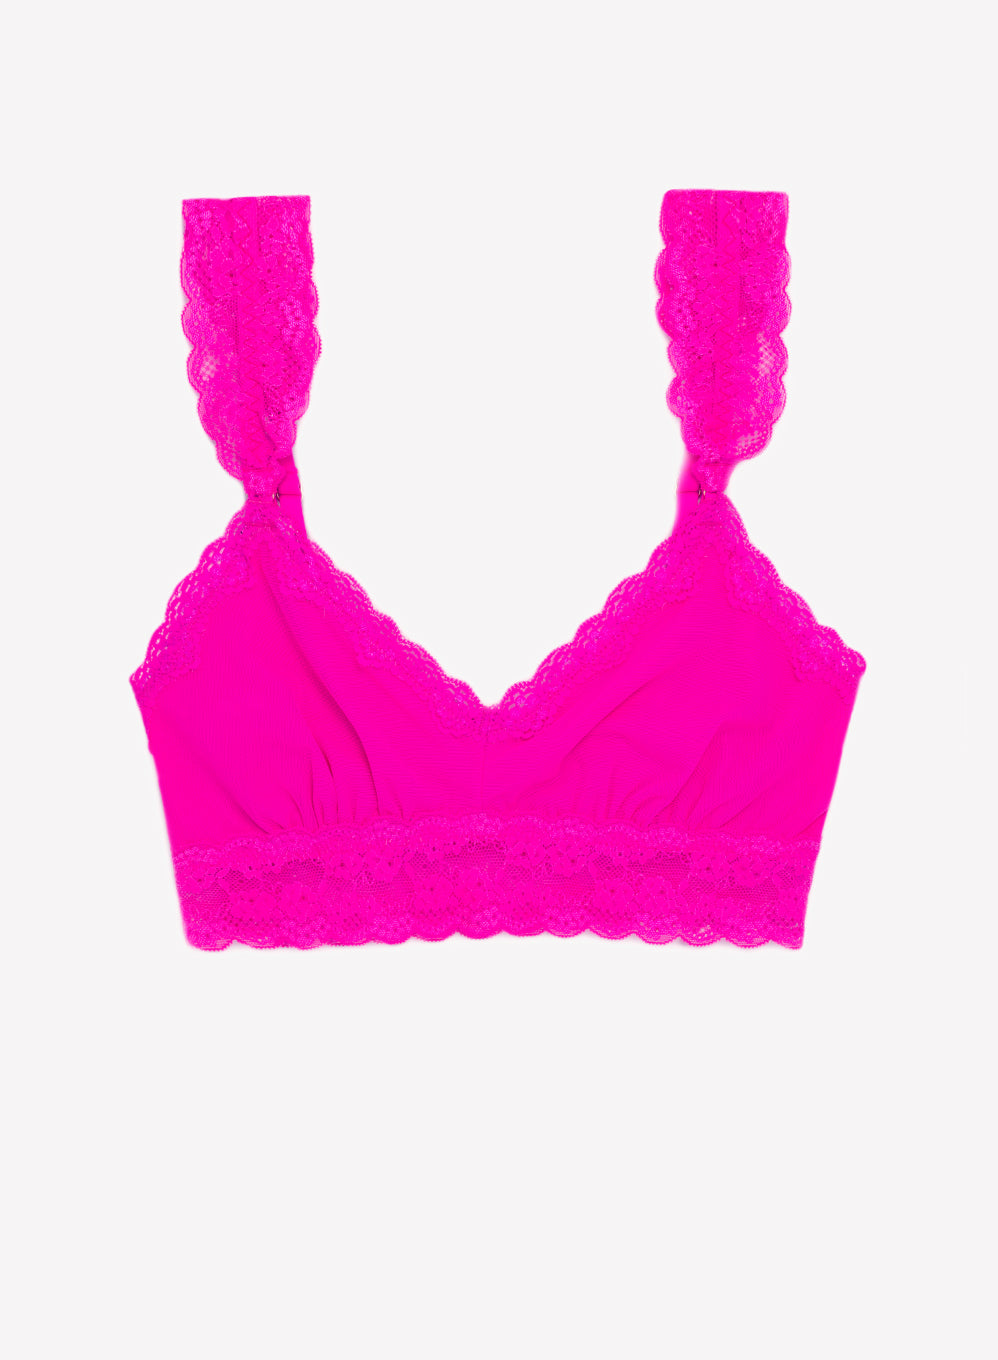 Lace and Mesh Bralette - Spring pink